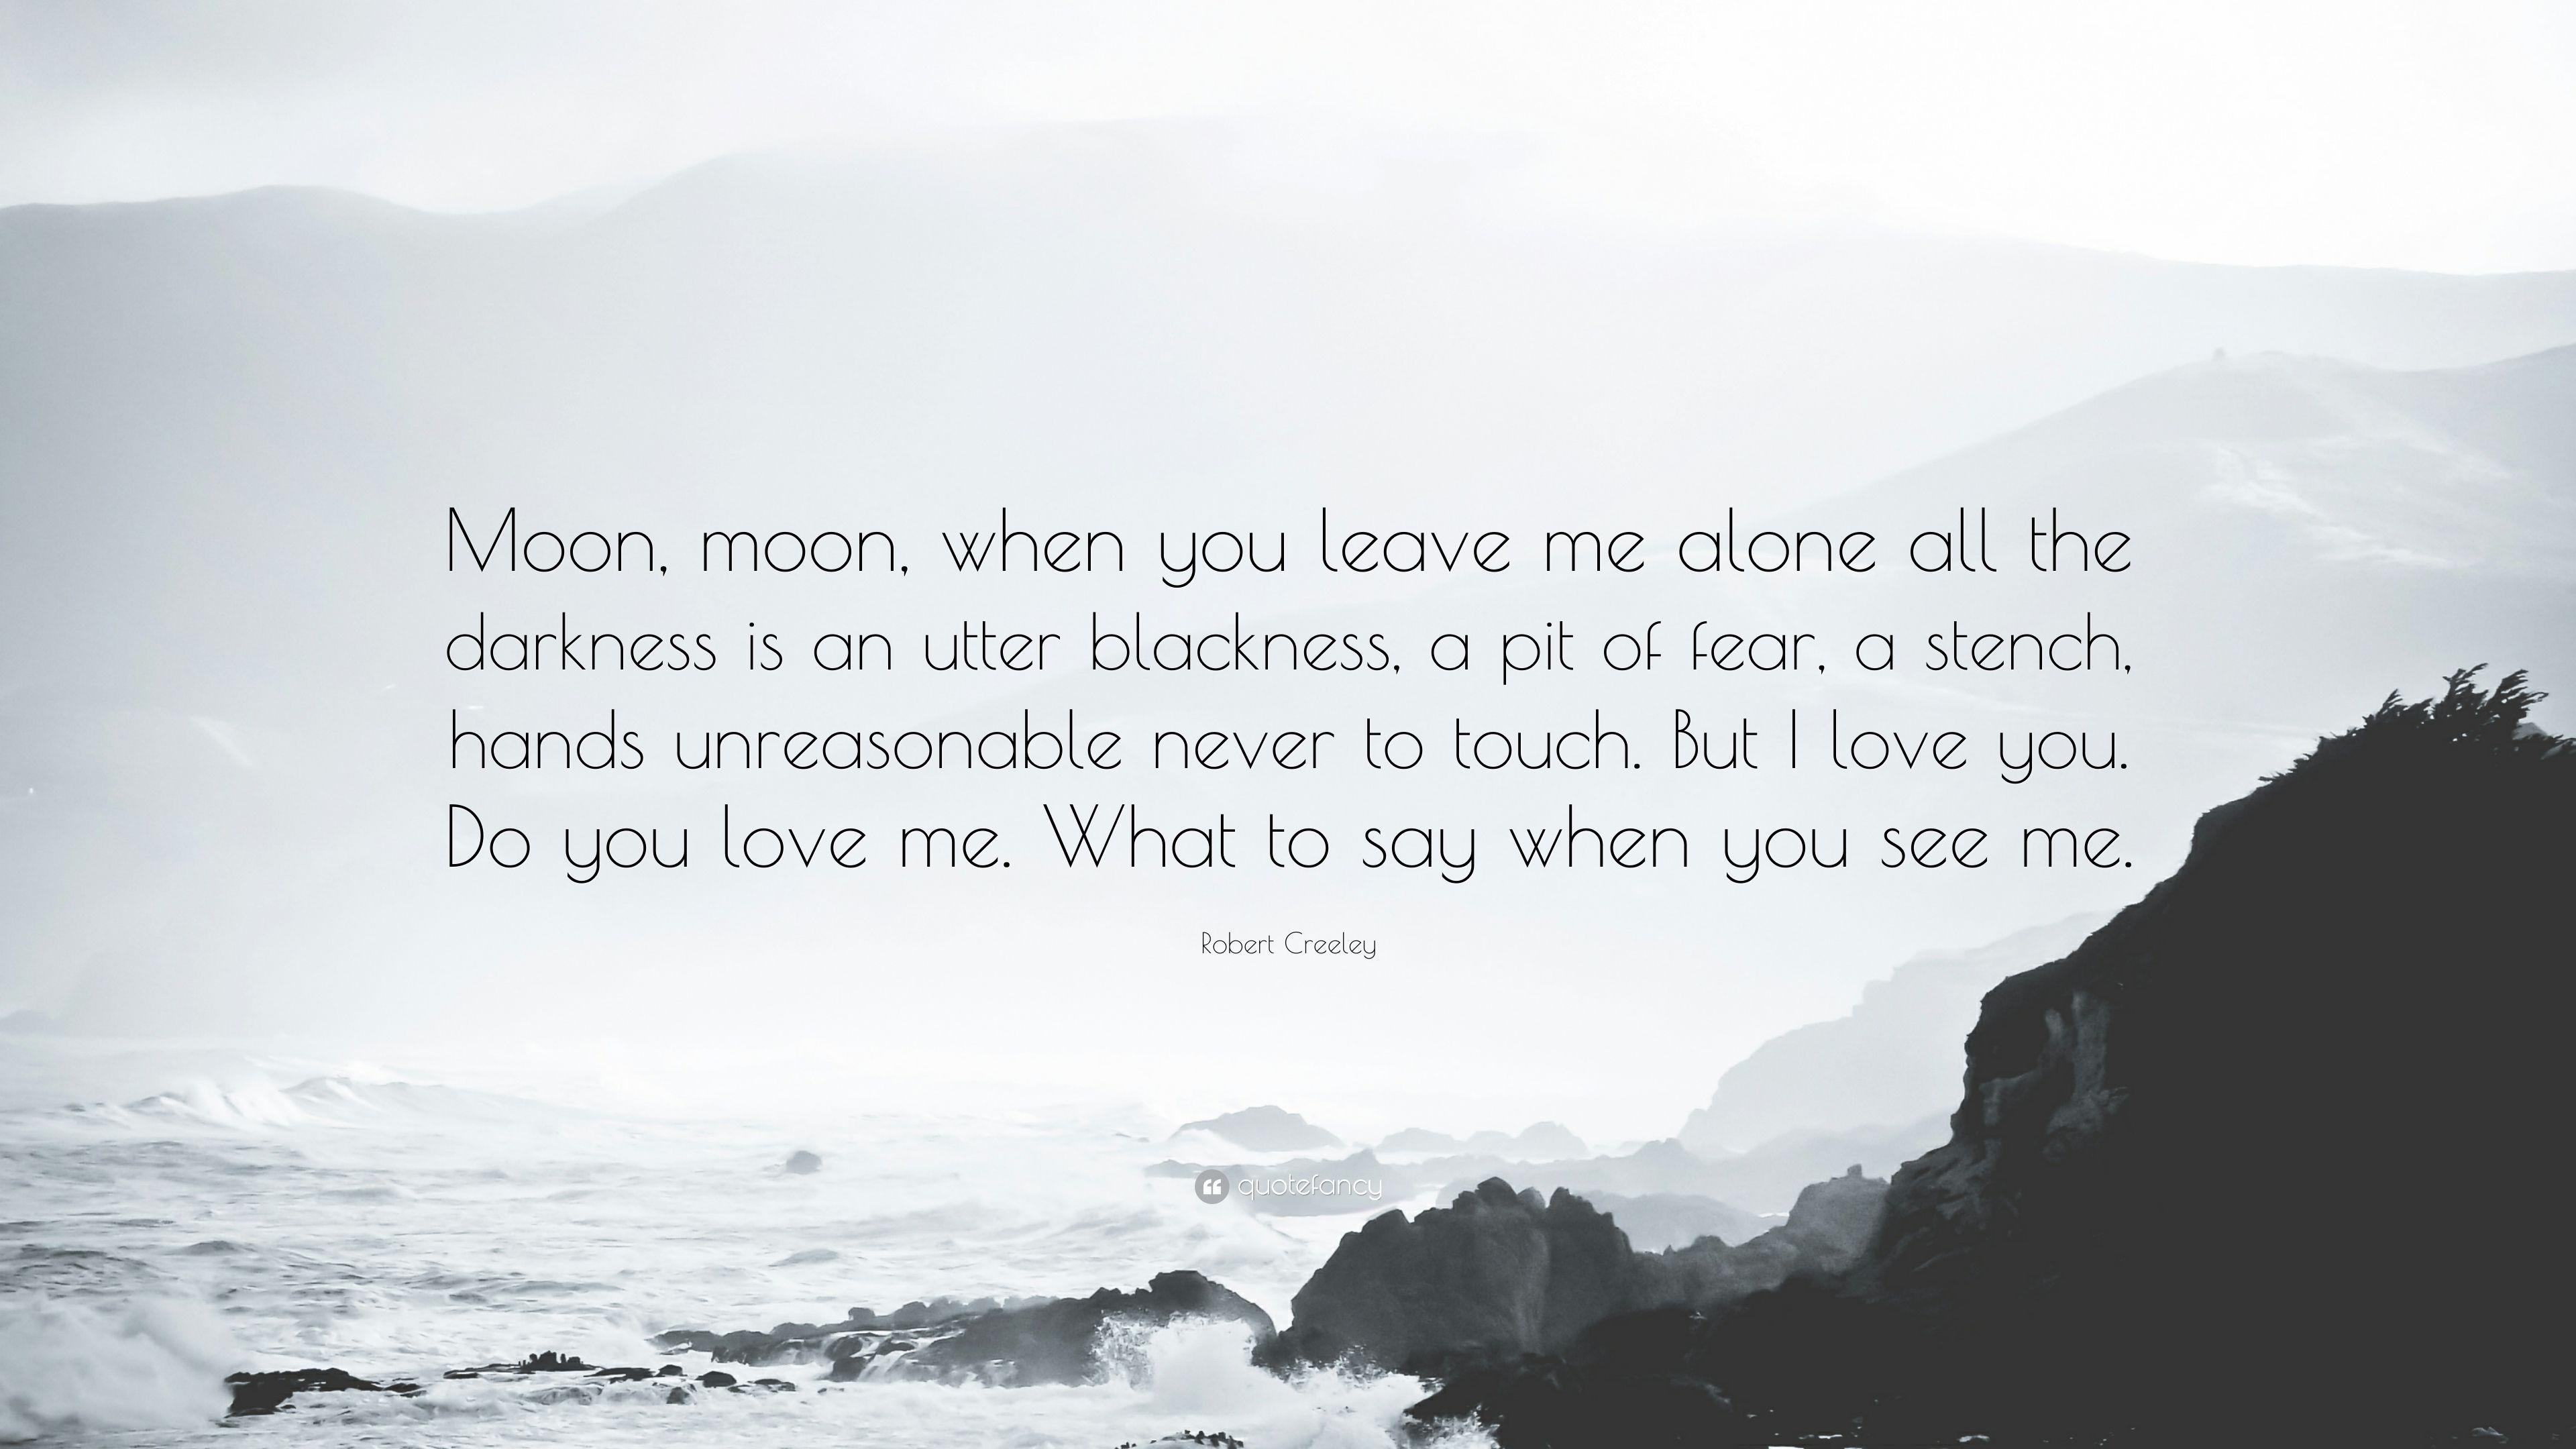 Robert Creeley Quote: “Moon, moon, when you leave me alone